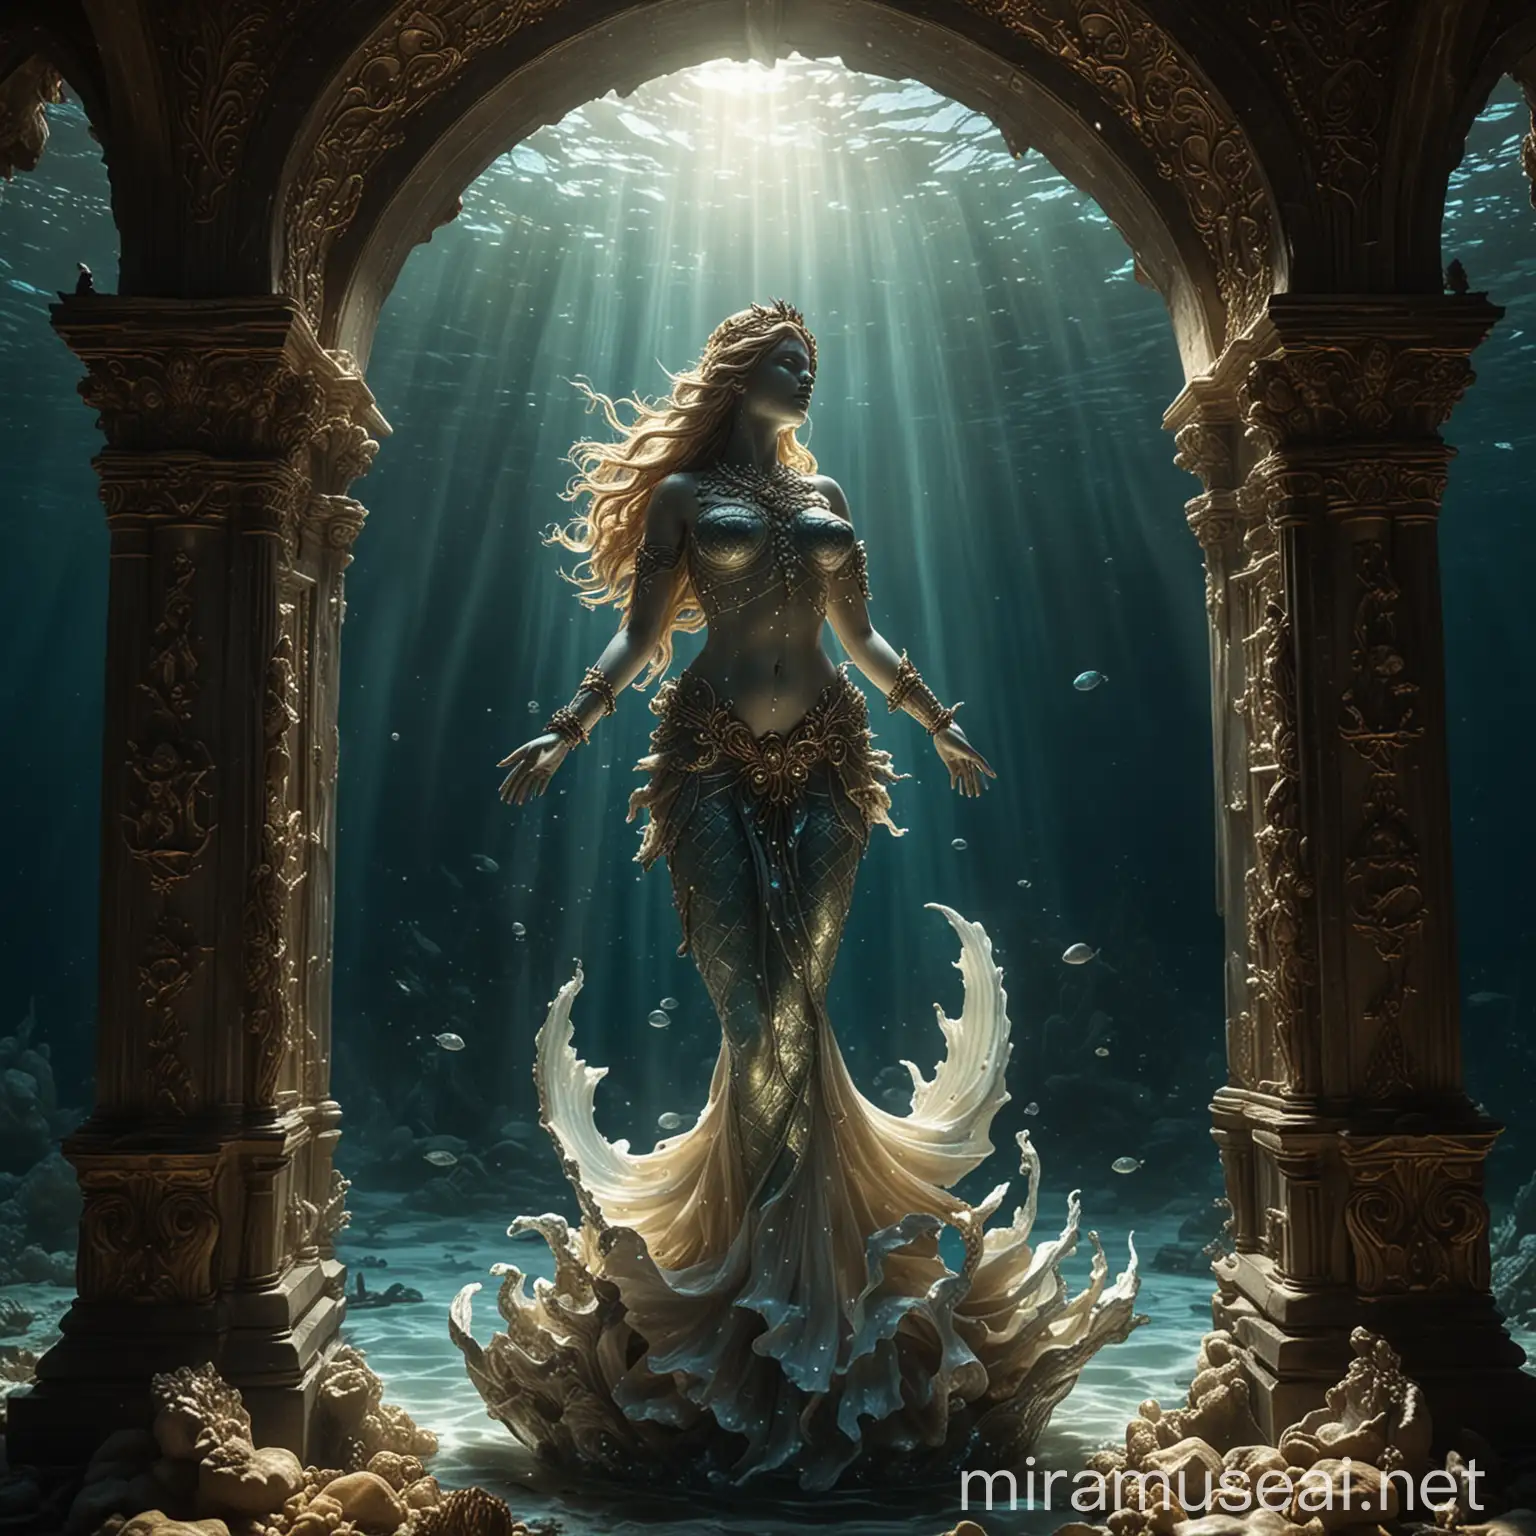 MERMAIDS, BEST QUALITY, FULL HD, 8K, image presents a truly breathtaking view of the depths of the sea, capturing a portal-like entrance to an underwater celestial, EMOTIONAL city. The portal-like entrance to the celestial city is adorned with awe-inspiring details, offering a tantalizing glimpse of the magnificent city beyond. From a distance, the city appears truly remarkable, constructed from celestial gold and adorned with pearls, reminiscent of the treasures of the deep sea. Its ethereal glow illuminates the surrounding waters, casting a mesmerizing aura that beckons travelers from afar. As one draws nearer, the intricate beauty of the city becomes more apparent. Towering spires crafted from celestial gold reach towards the heavens, while domes adorned with pearls shimmer with celestial light. Every surface is adorned with pearls, creating a spectacle that rivals the most wondrous dreams. At the center of this majestic entrance stands a stunning statue, carved from abalone IRIDESCENT, depicting a mesmerizing MERMAID Half fish, half woman, the mermaid possesses a captivating beauty that transcends the ocean's depths. Her enchanting crown adorns her head with elegance, emitting an ethereal glow even beneath the dark waters. The image is captured in the depths of the sea, revealing the intricate details of the statue and the portal entrance. The filtered light from the layers of water above creates a play of shadows and reflections, further highlighting the beauty and magic of the scene. In the background, between the arches of the entrance, one can glimpse the outlines of the celestial city, promising a glimpse of a world of enchantment and wonder. This image captures the essence of fantasy and beauty that inhabit the depths of the ocean, transporting the observer to a realm of dreams and imagination.